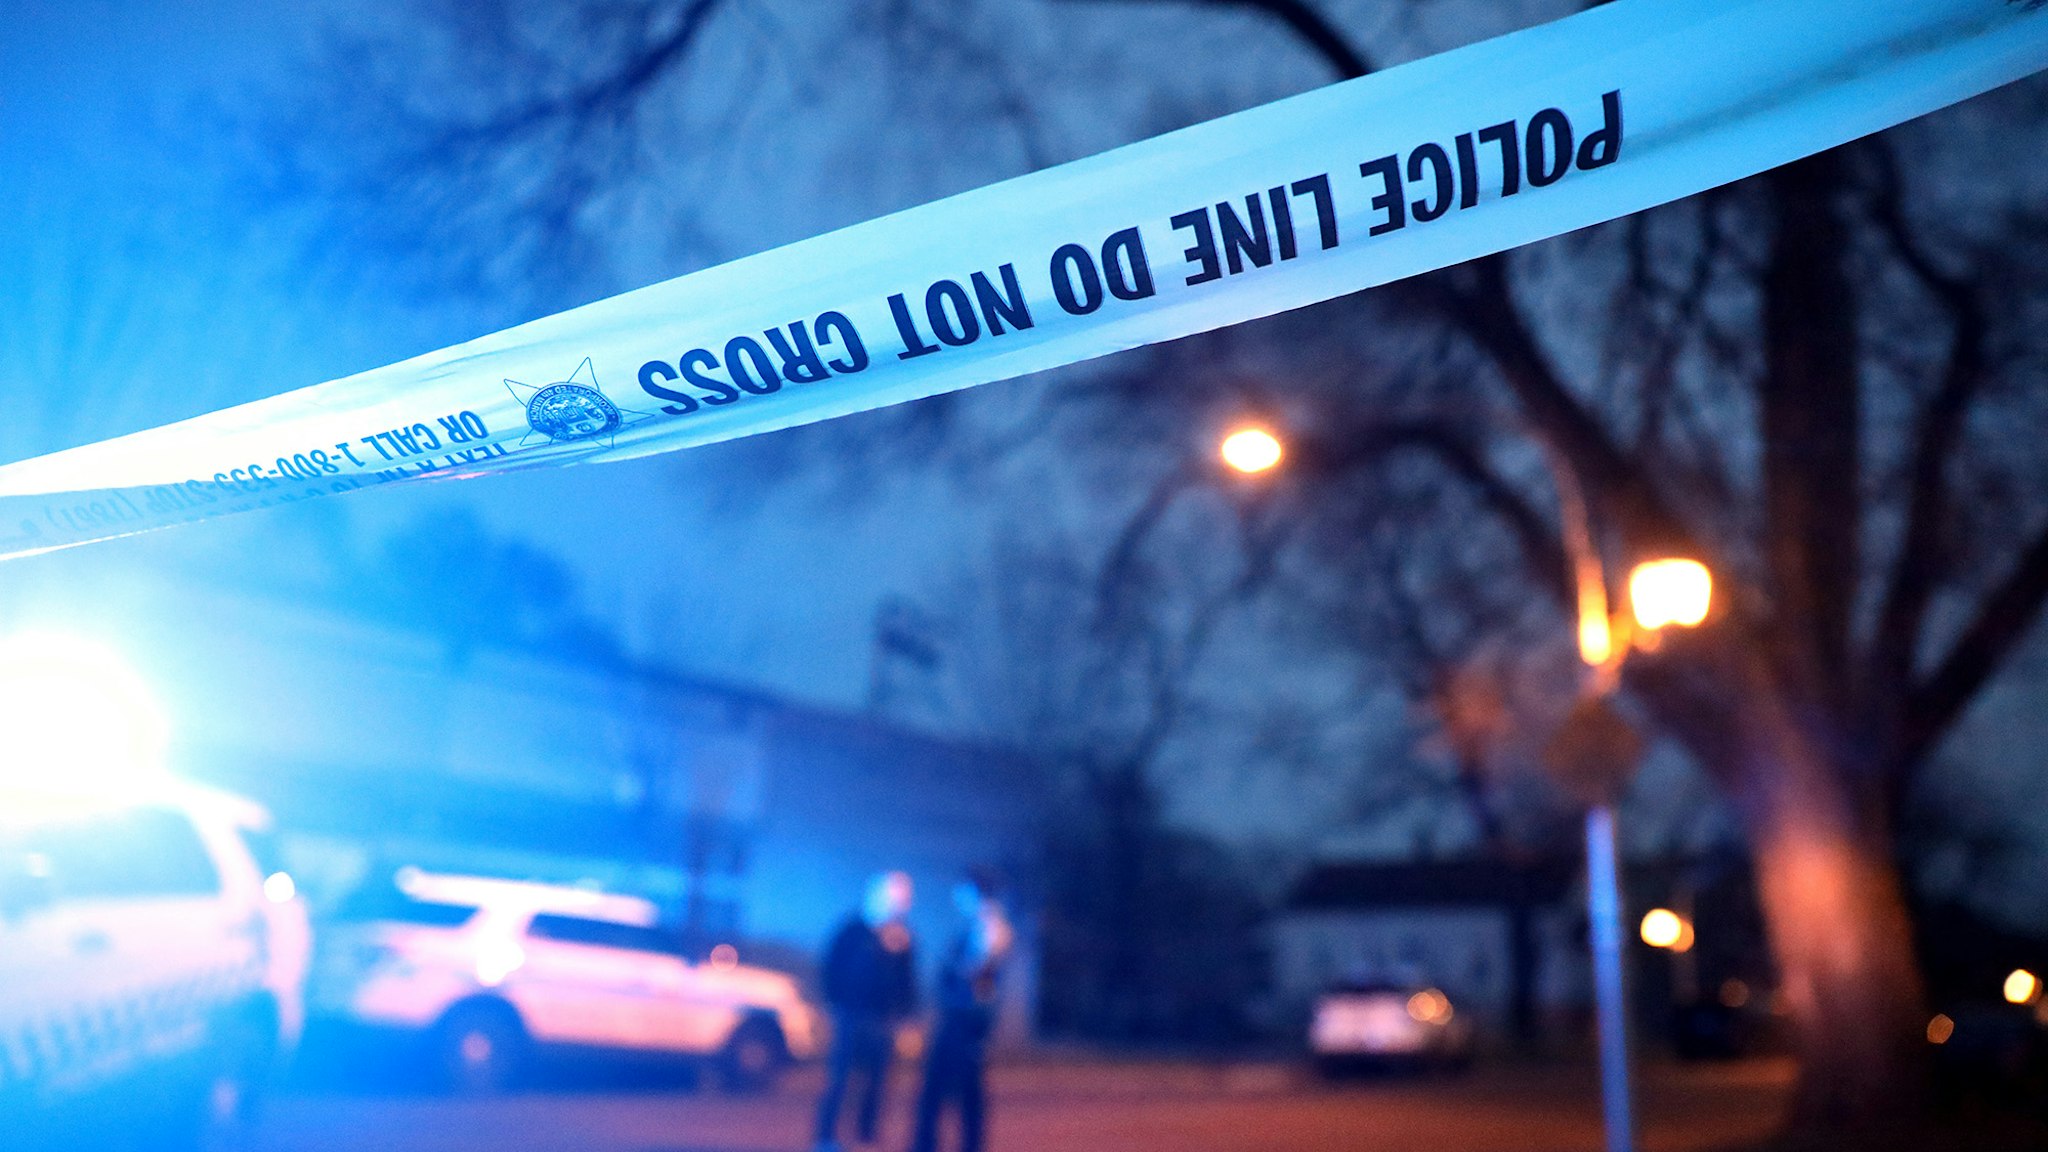 hicago police work the scene of a shooting in the 6300 block of South Seeley Avenue on Saturday, April 6, 2019. (Chris Sweda/Chicago Tribune/Tribune News Service via Getty Images)